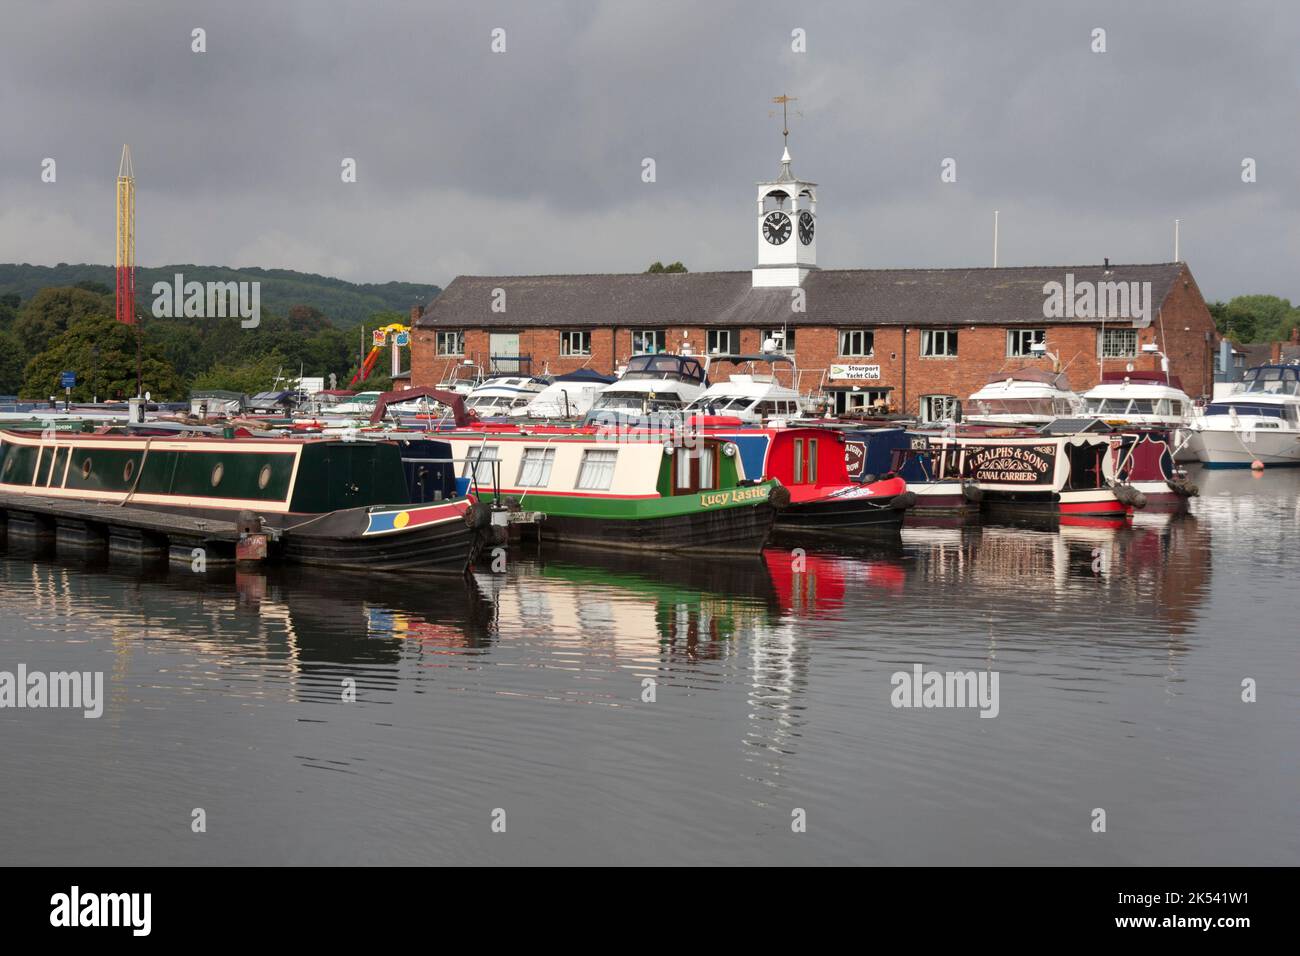 Stourport sul molo del canale Severn, bacino del canale, Stourport Ring, Staffordshire & Worcestershire Canal, Worcs, Inghilterra Foto Stock